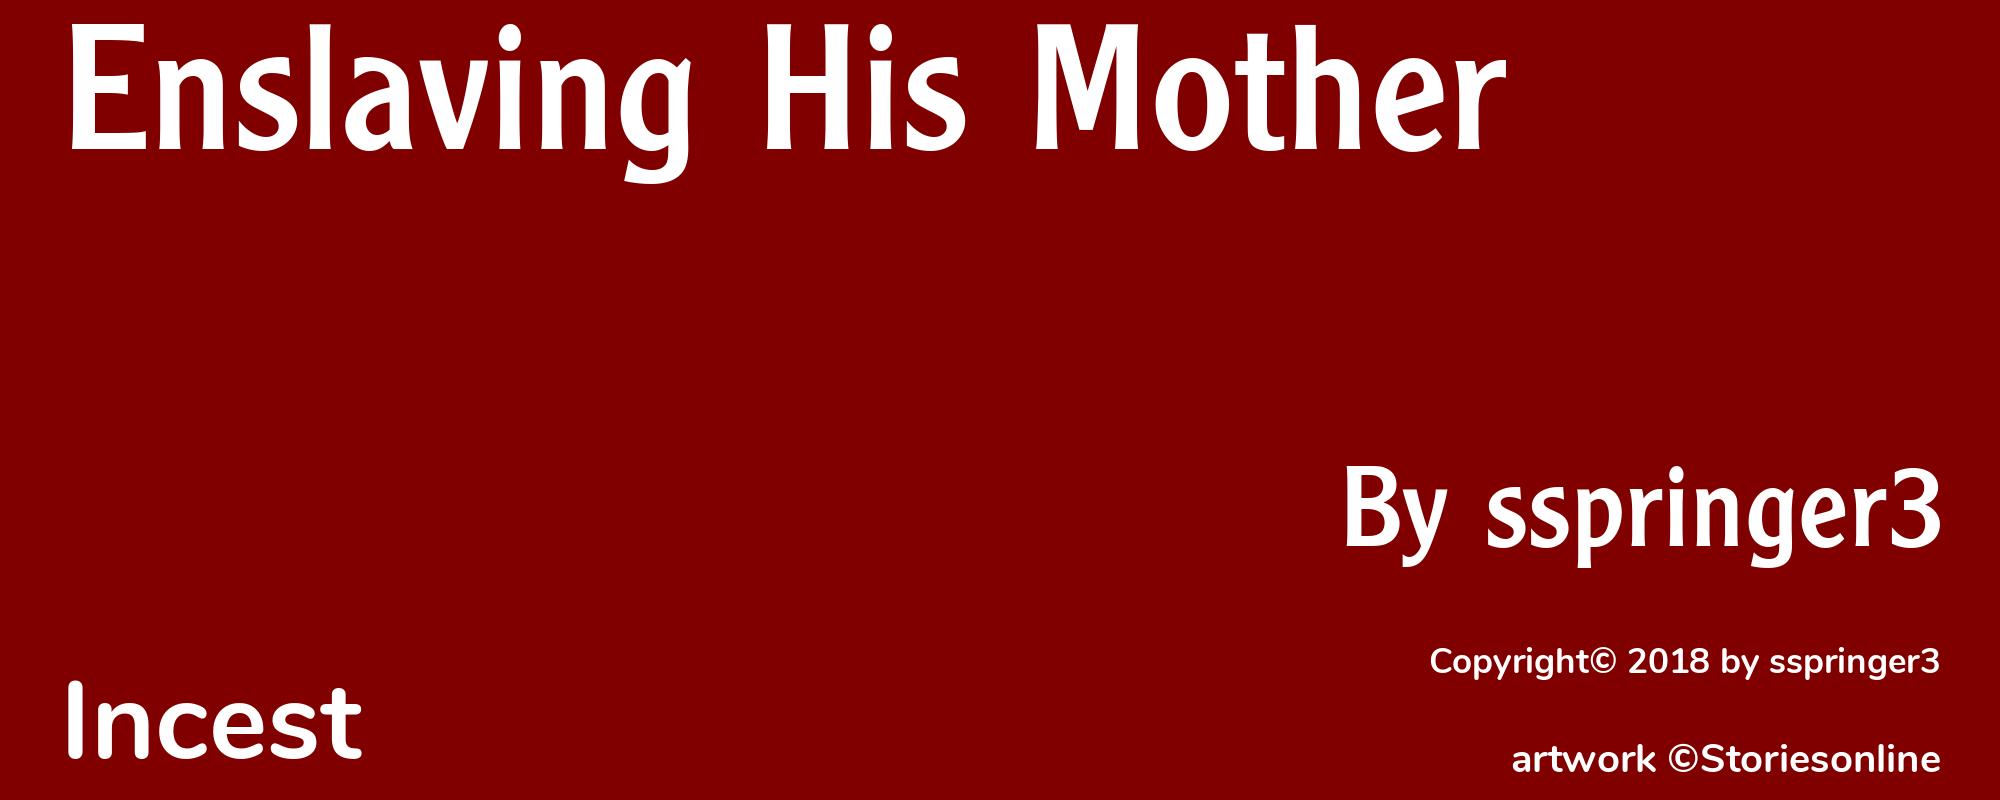 Enslaving His Mother - Cover